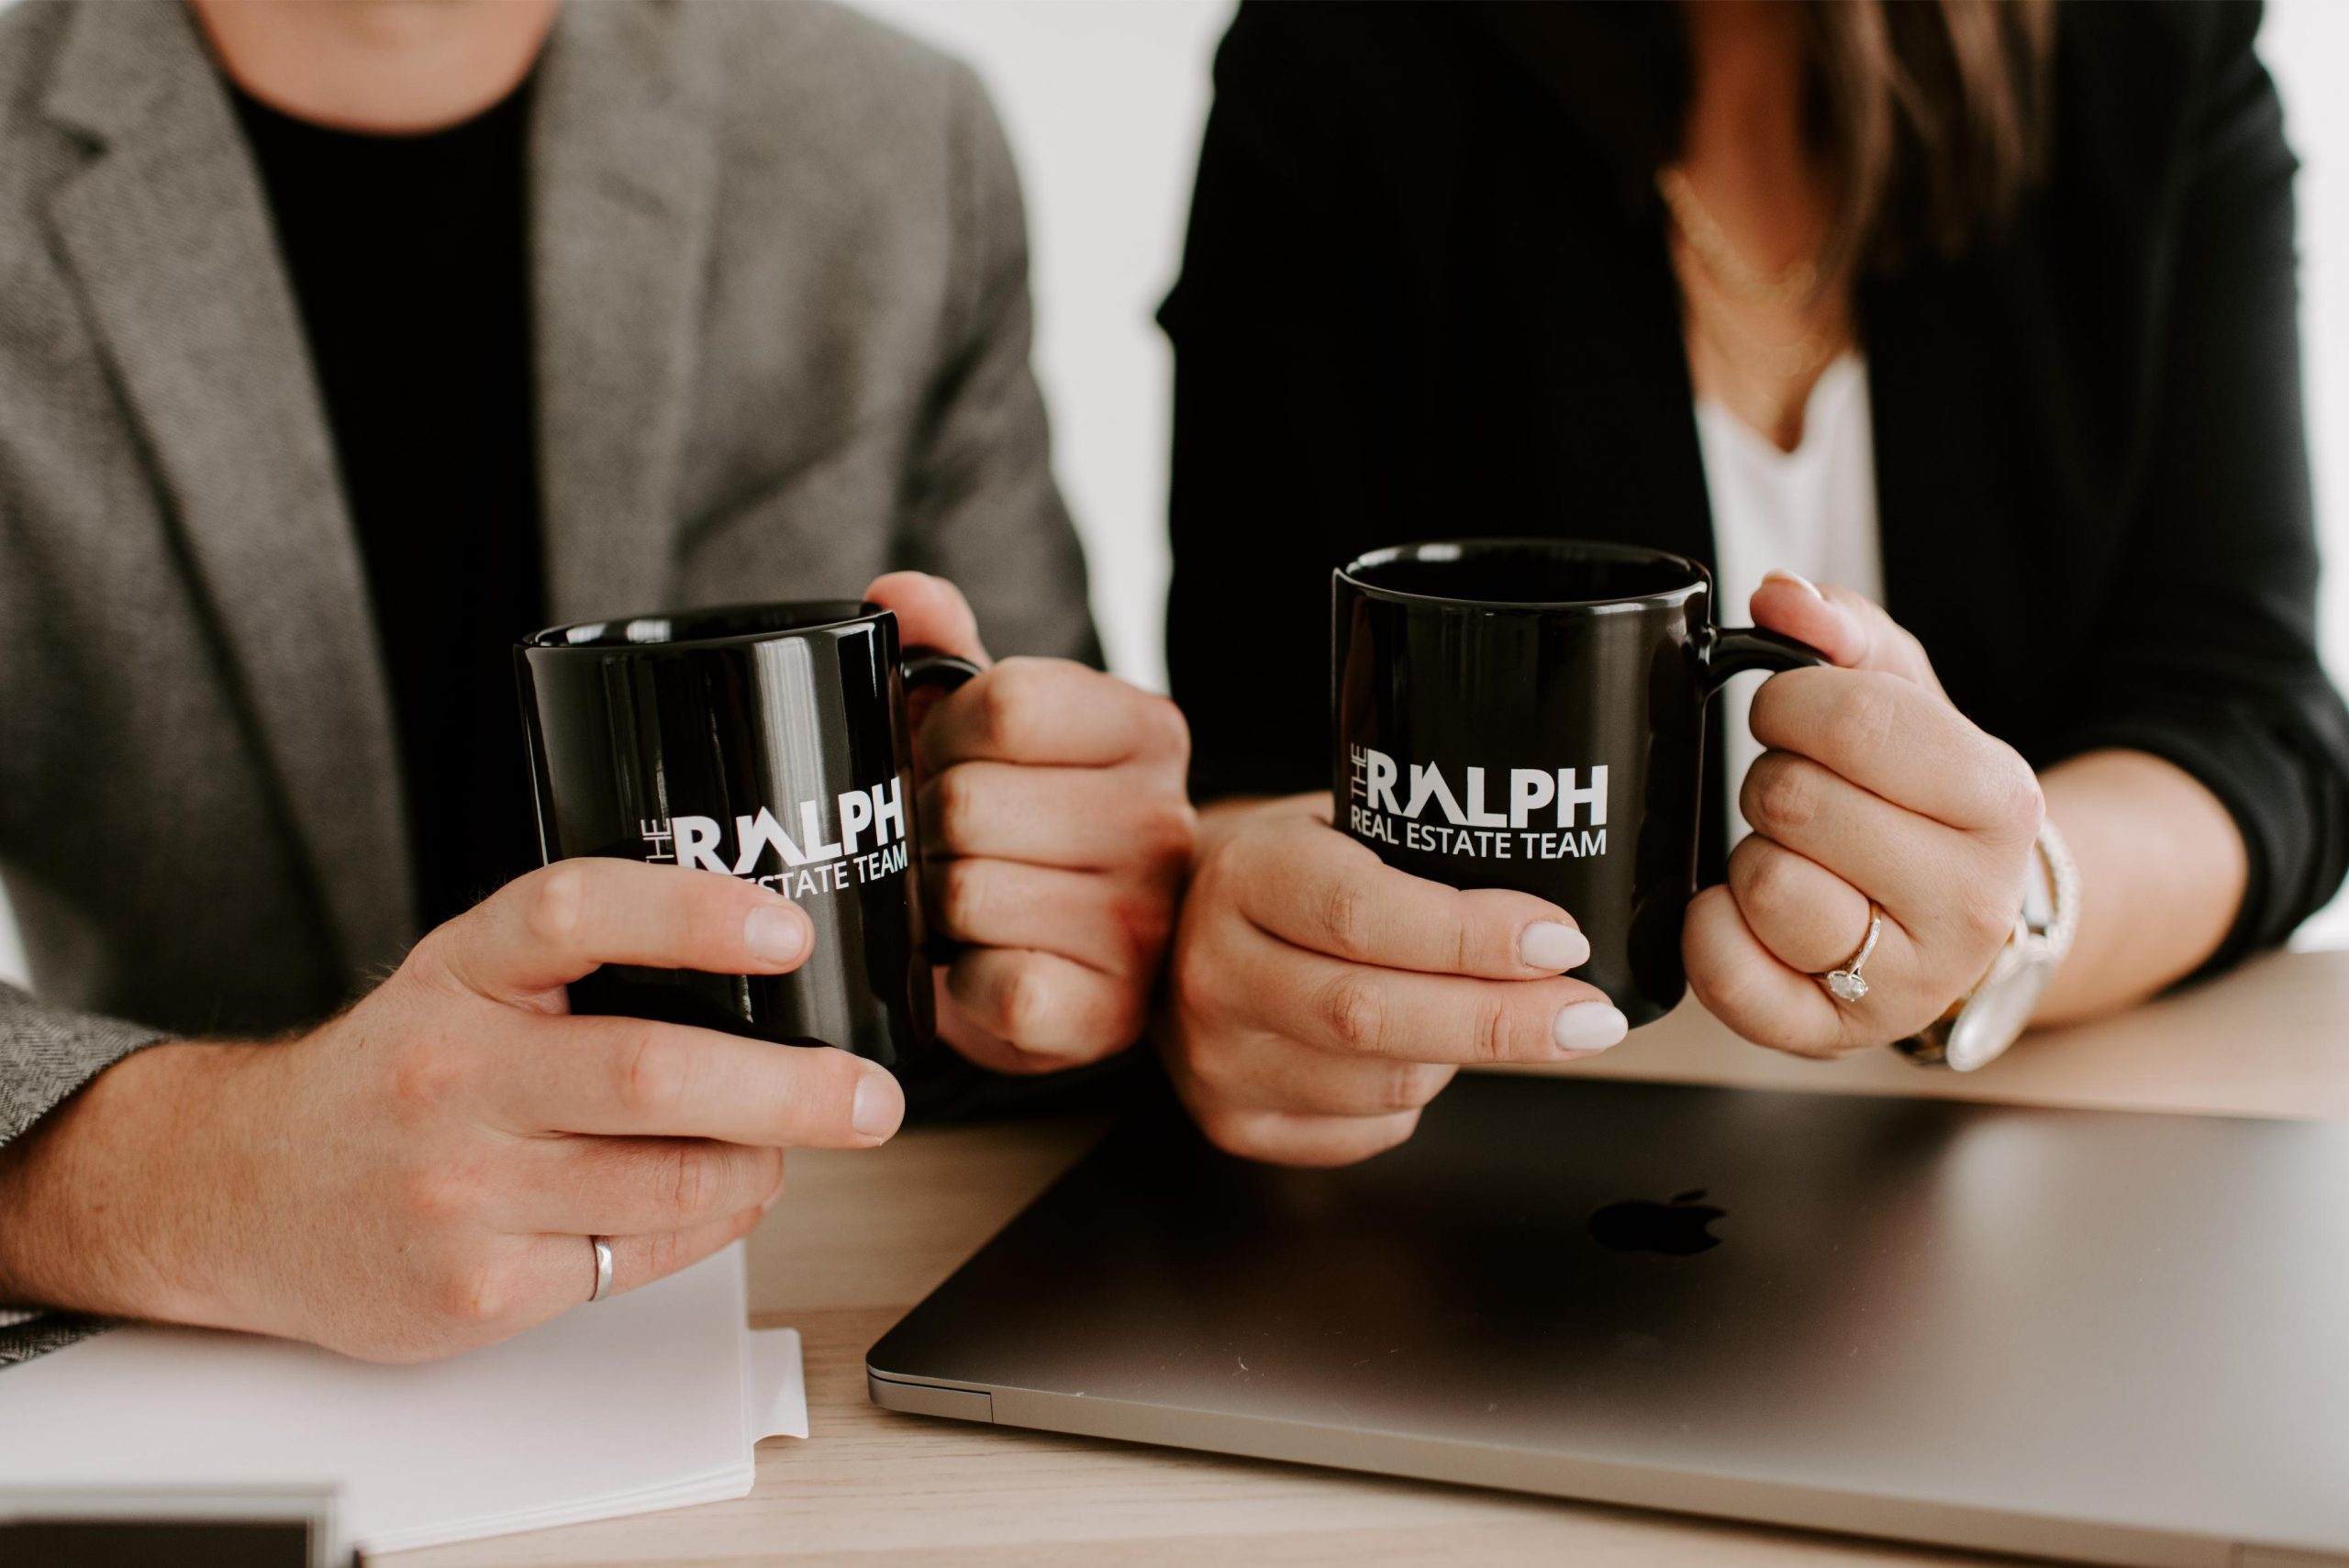 The Ralph Real Estate will help you find your dream home.